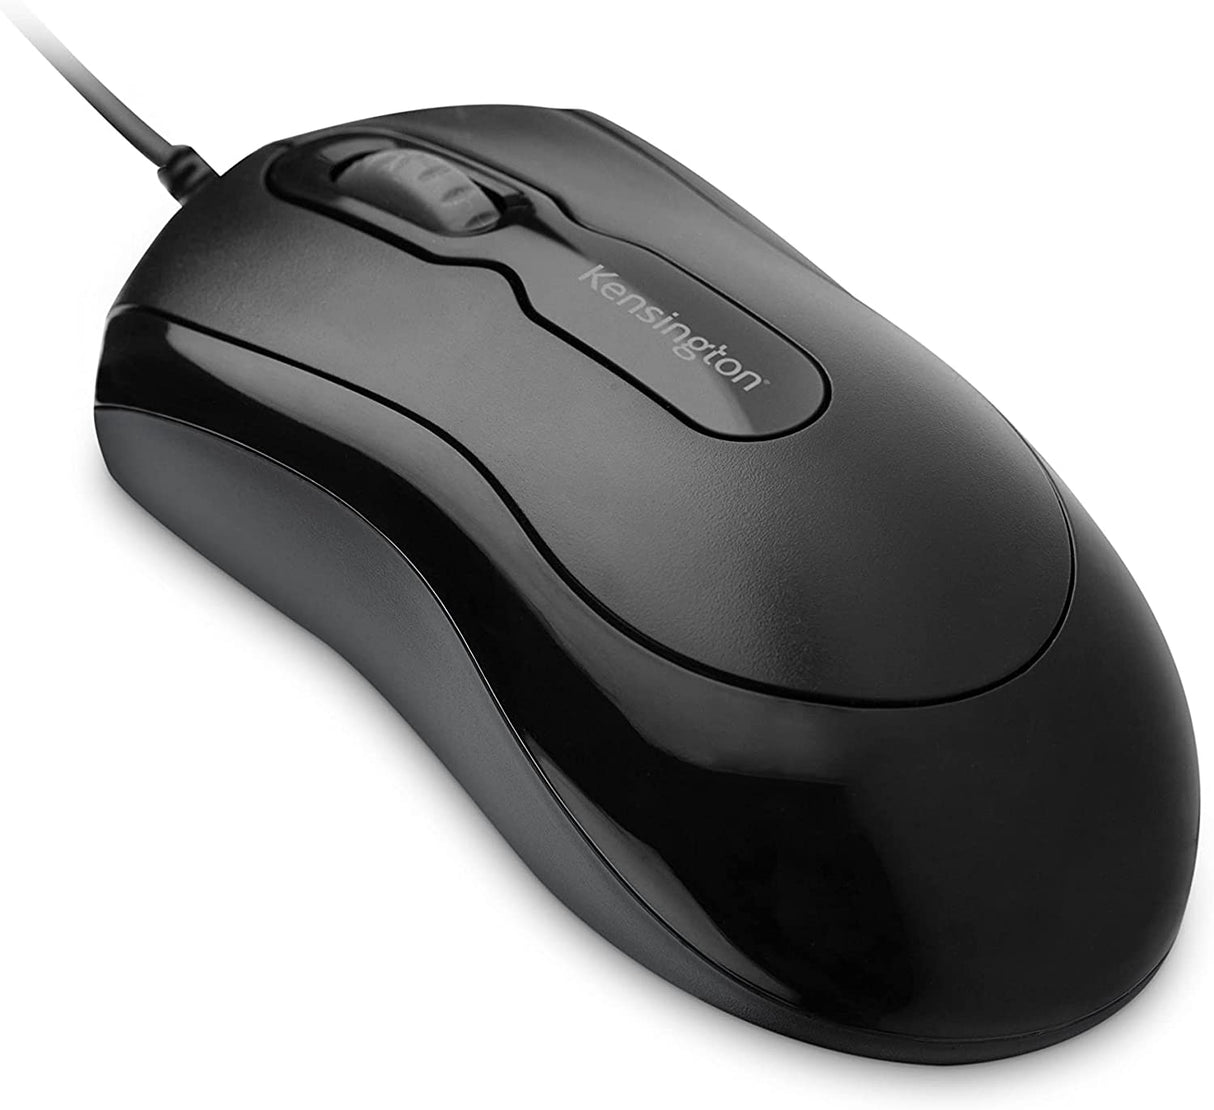 Kensington Mouse-in-a-Box Wired USB Mouse (K72356US),Black